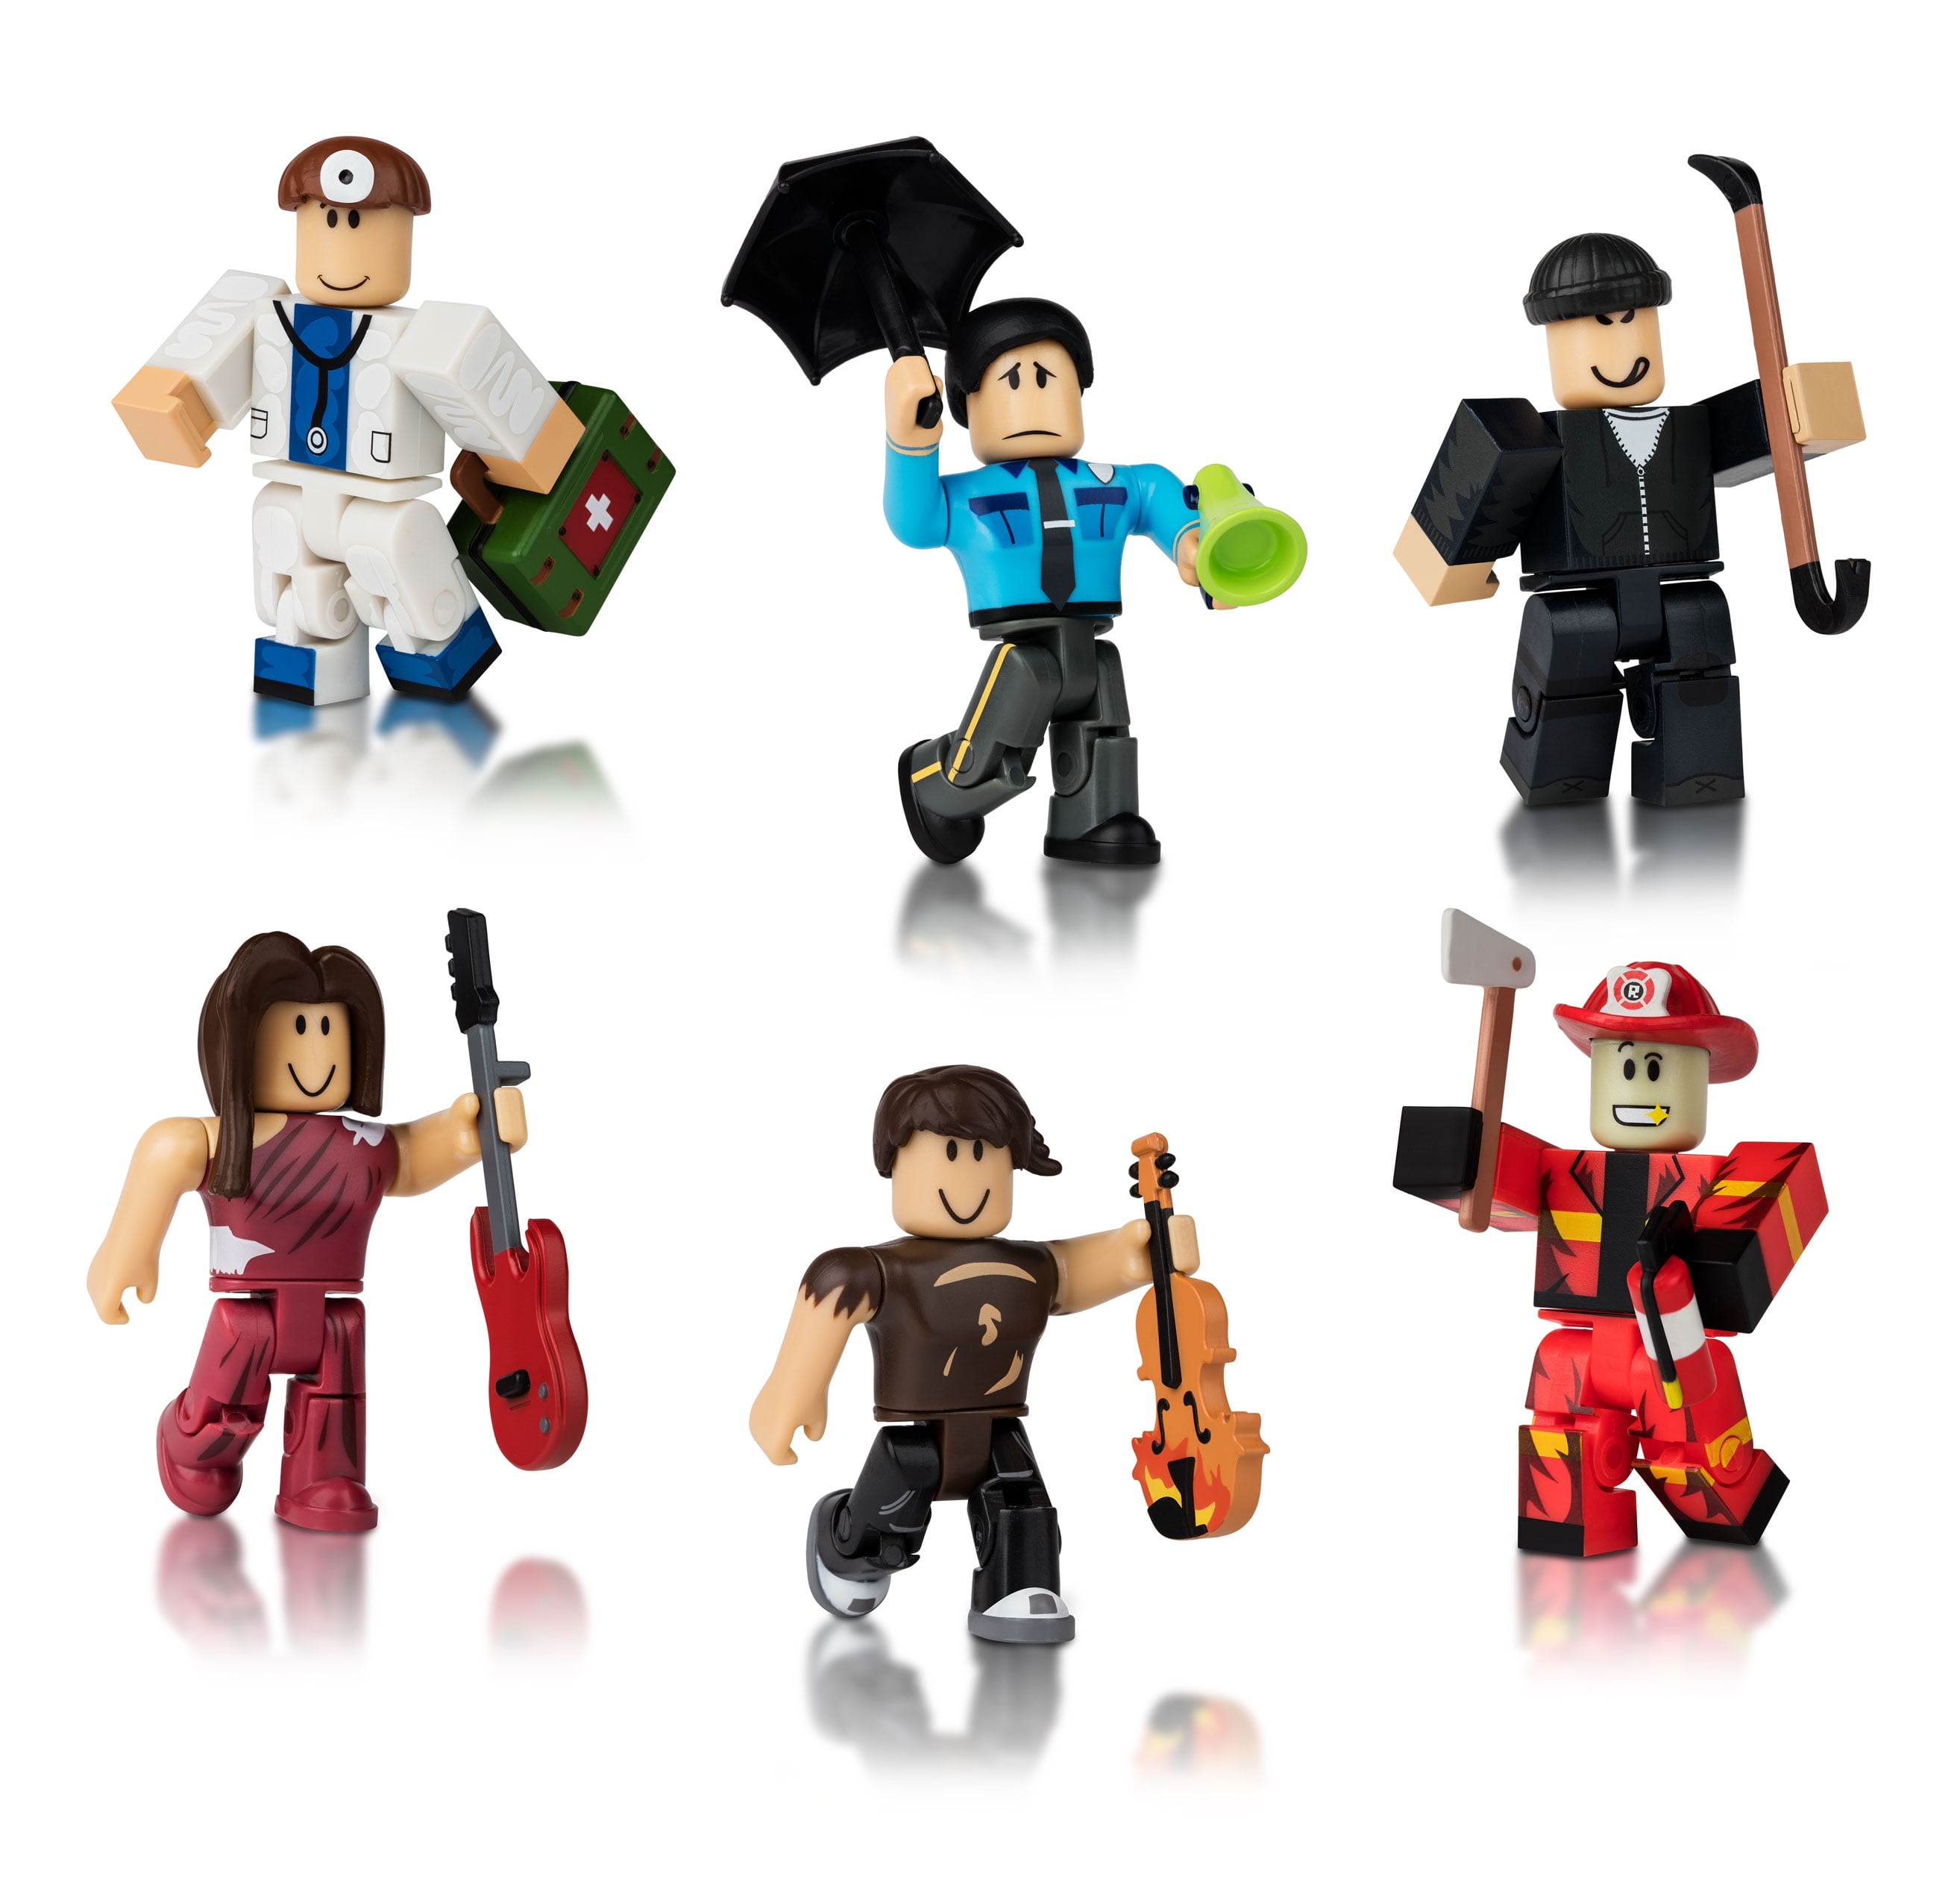 Roblox Action Collection Citizens Of Roblox Six Figure Pack Includes Exclusive Virtual Item Walmart Com Walmart Com - driving sandbox new roblox